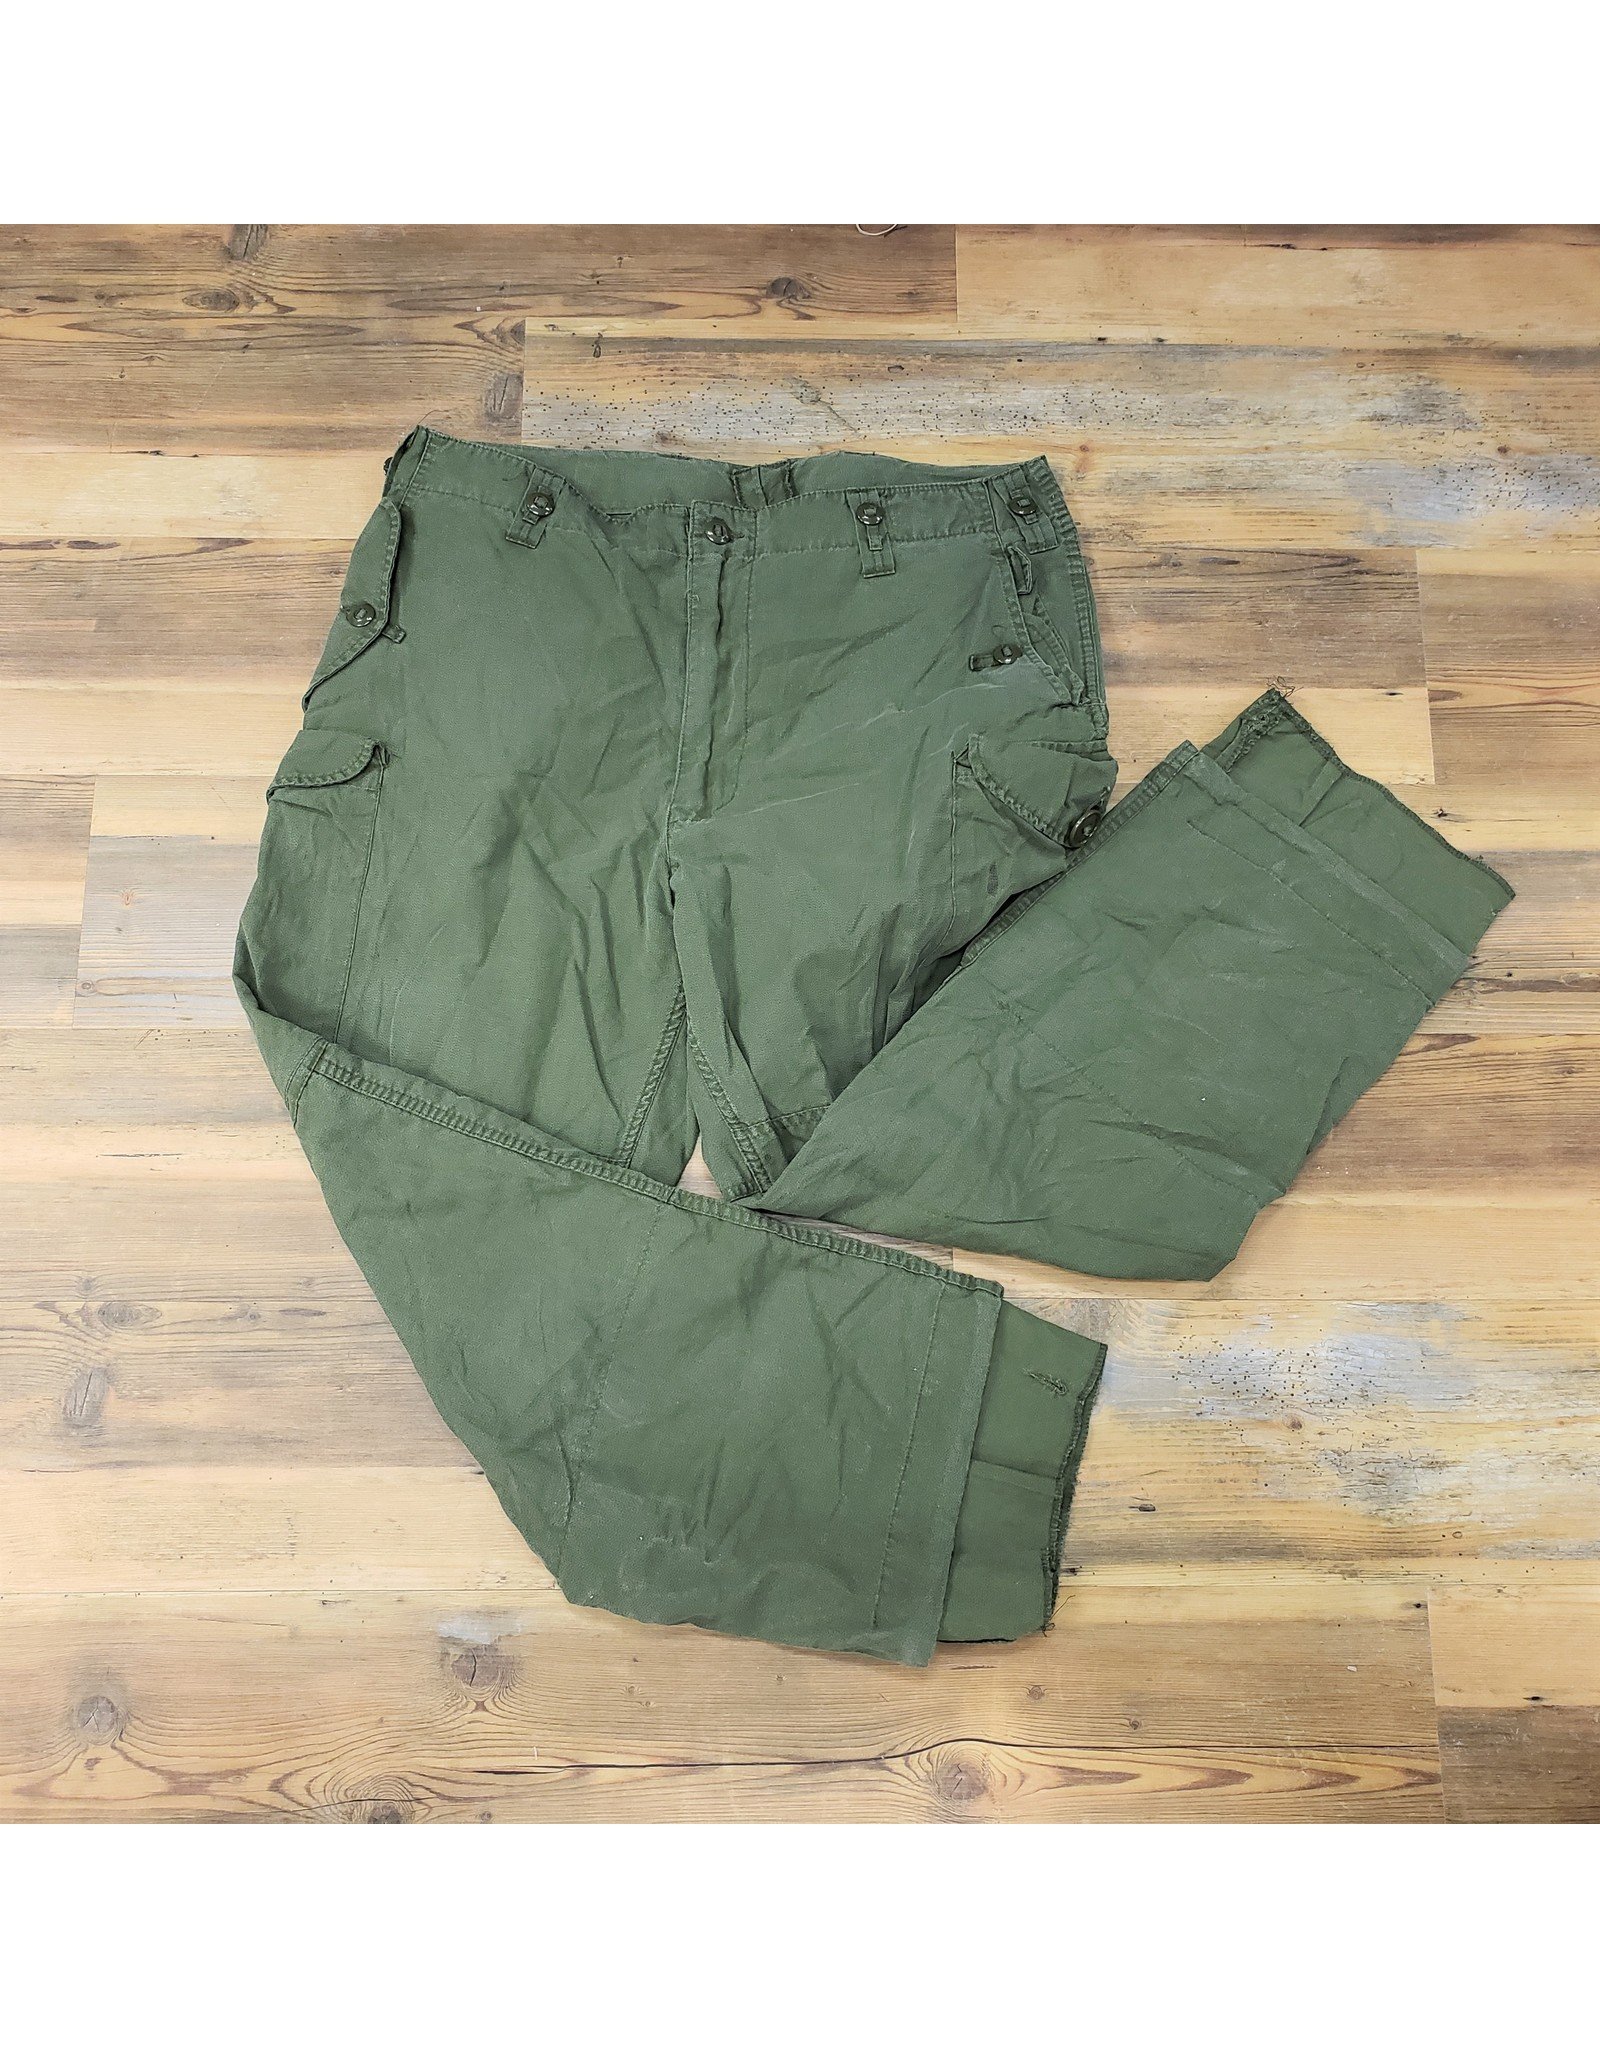 Sportsman Olive Military Underwear - Army Supply Store Military